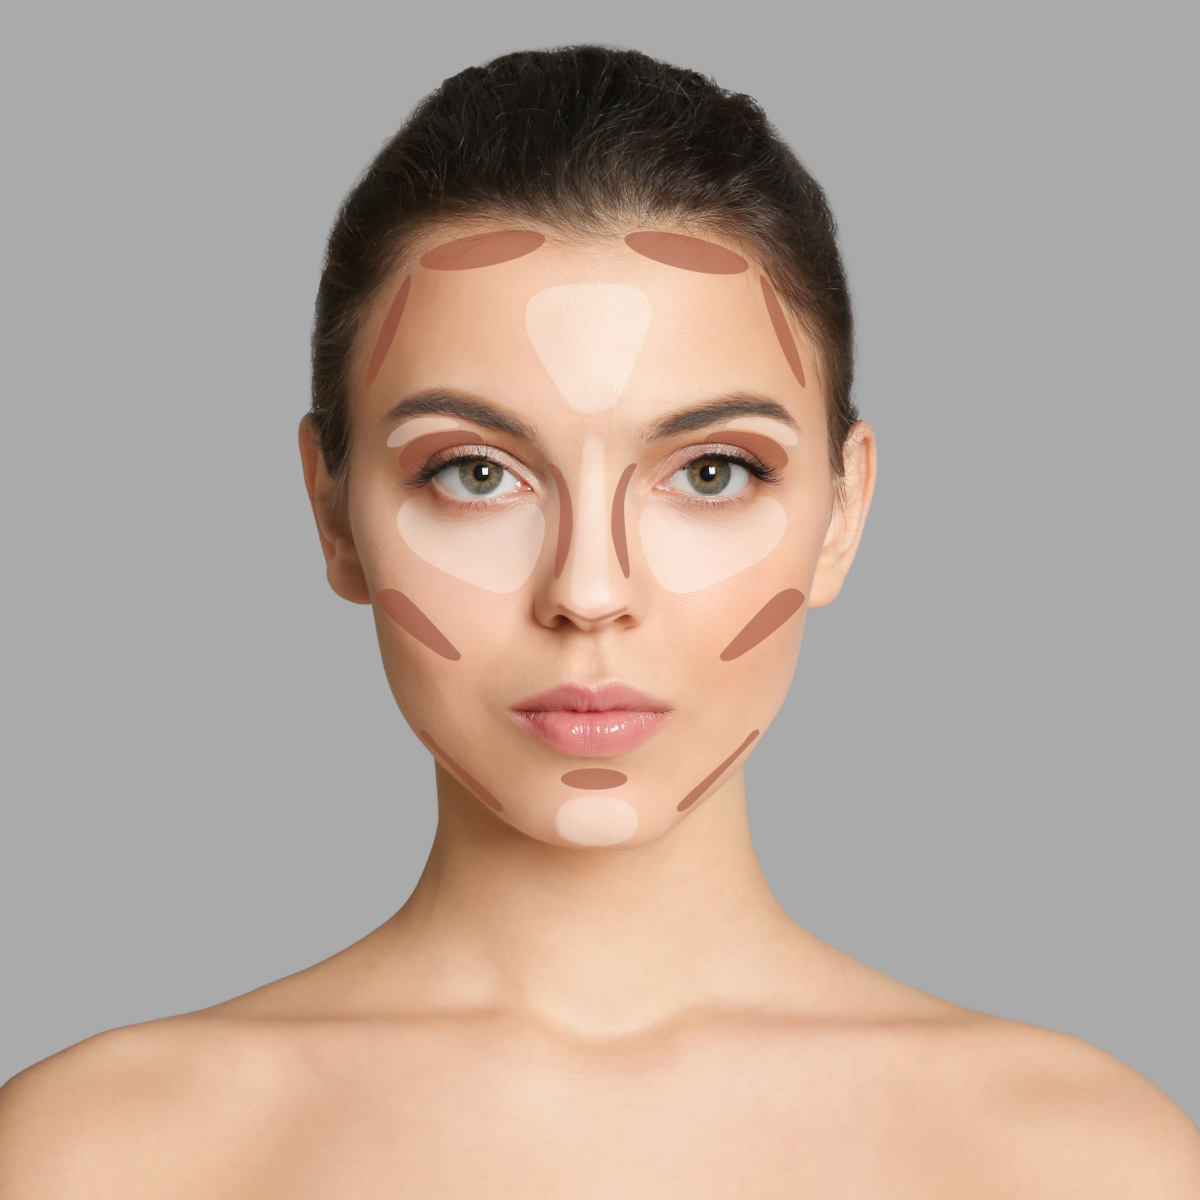 Woman with contour makeup on.